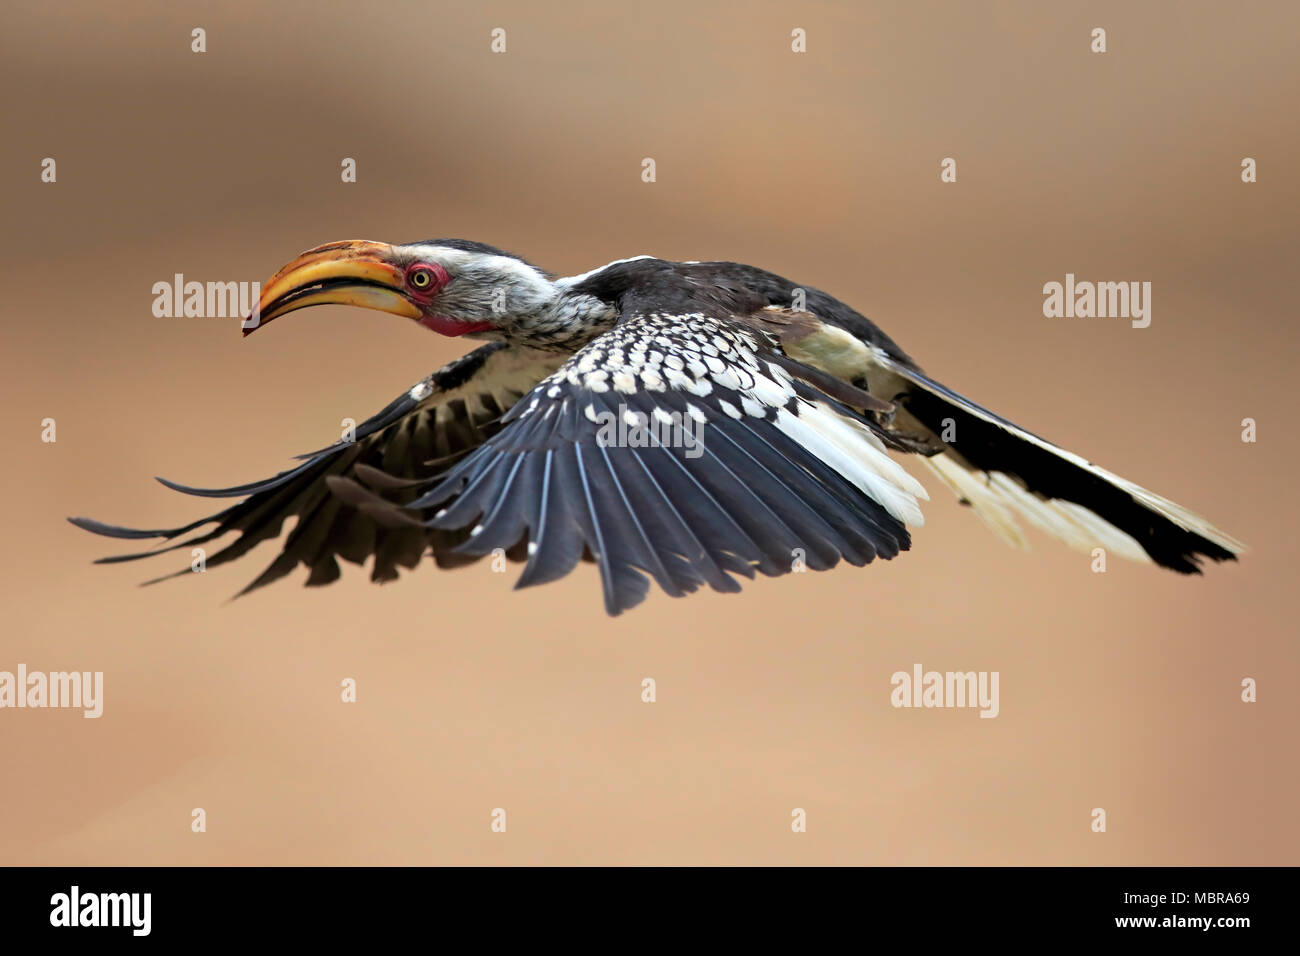 Southern Yellow-fatturati Hornbill (Tockus leucomelas), Adulto, volare, Kruger National Park, Sud Africa Foto Stock